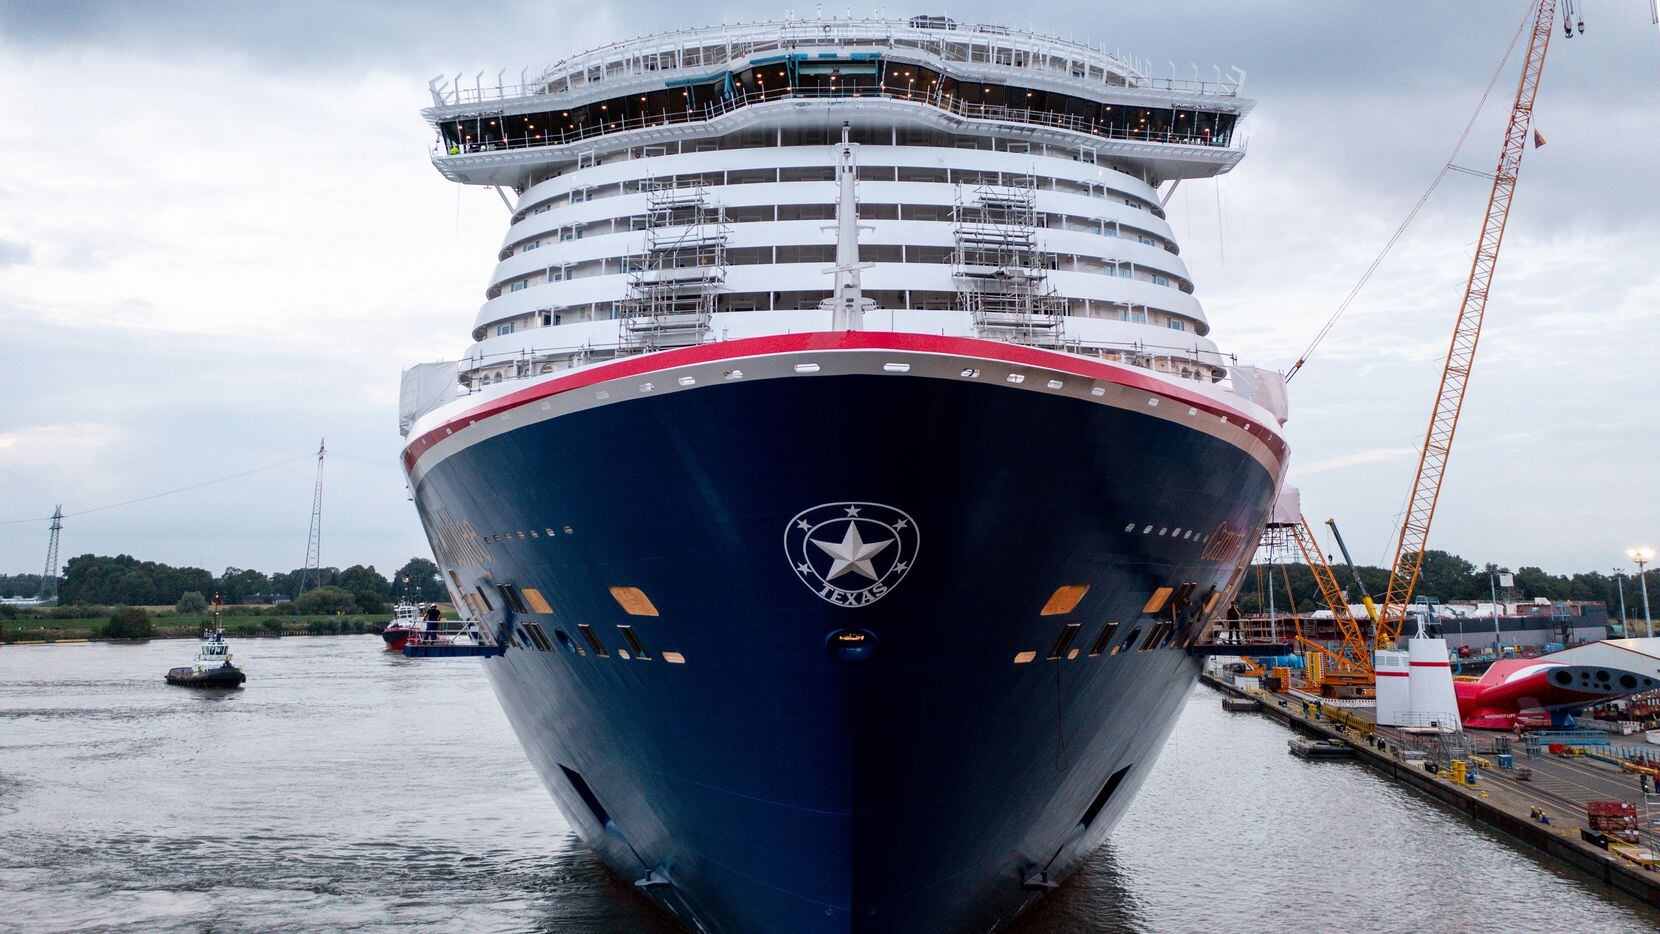 Carnival Cruise Line's new Jubilee cruise ship carries a Texas star design. It'll set sail...